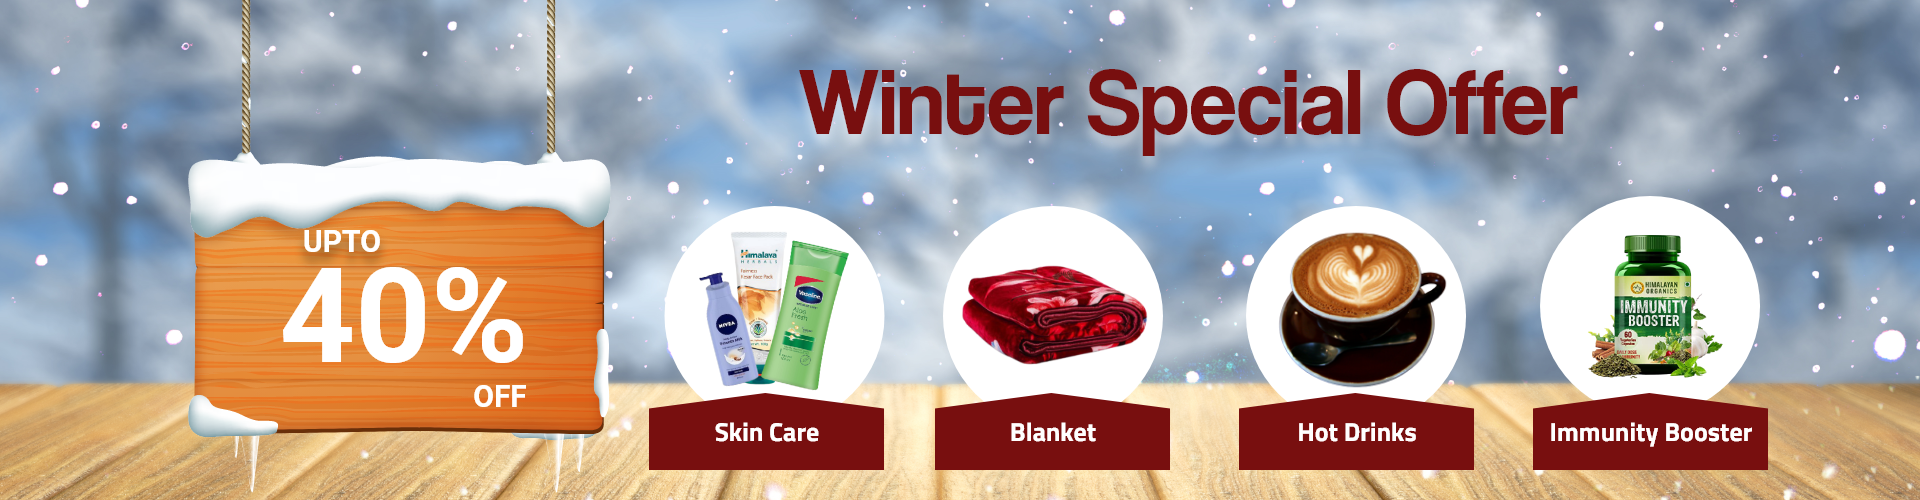 Winter Special Offer